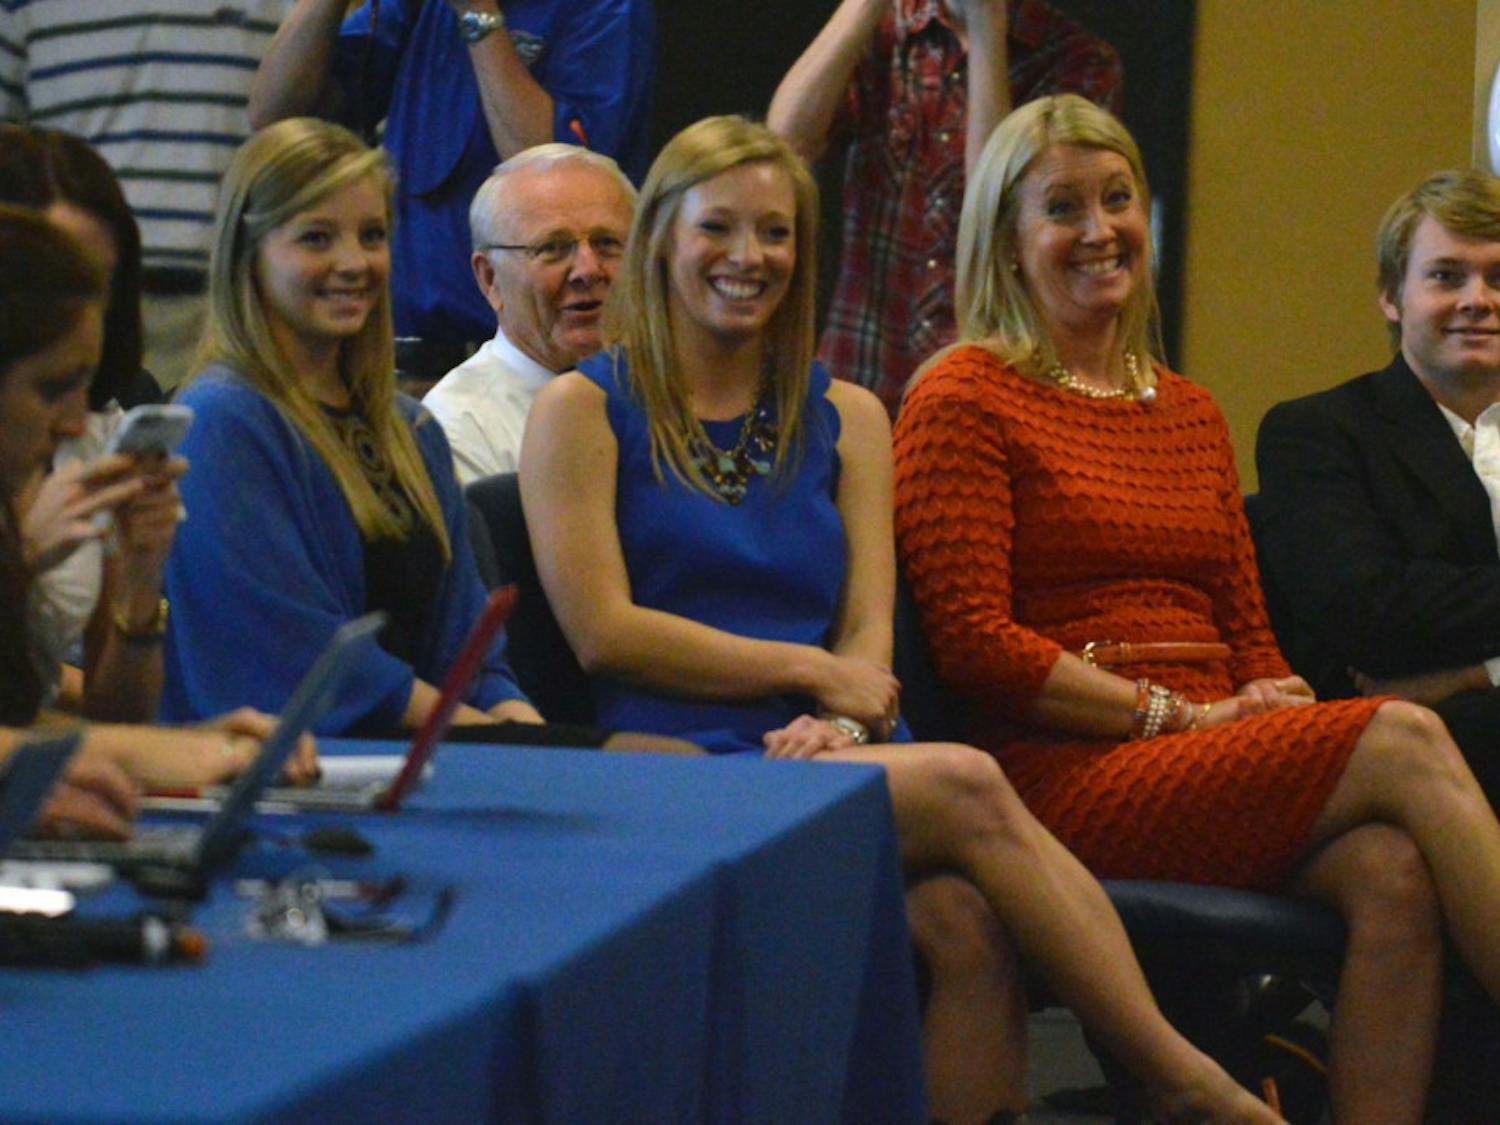 Daughters Elizabeth McElwain (from left) and Johanna McElwain, wife Karen McElwain and son Jerret McElwain listen to their father's introductory press conference on Saturday in Ben Hill Griffin Stadium.